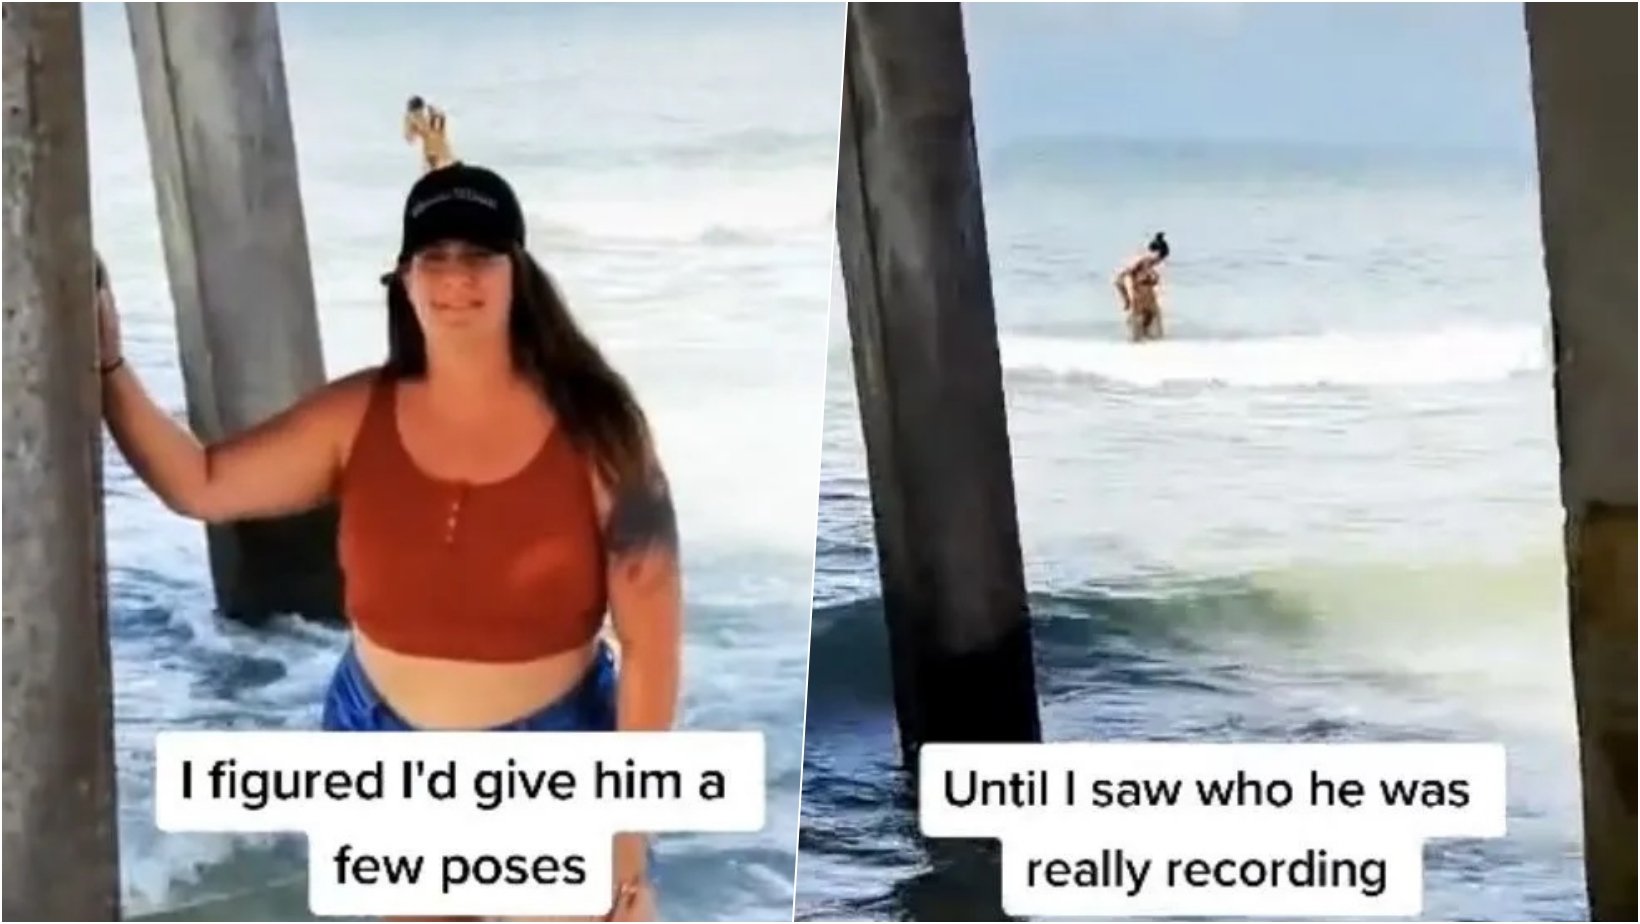 6 facebook cover 41.jpg?resize=1200,630 - Newlywed Wife Was Left Horrified After Discovering Her Husband Filming Another Woman In A Bikini During Their Honeymoon Getaway